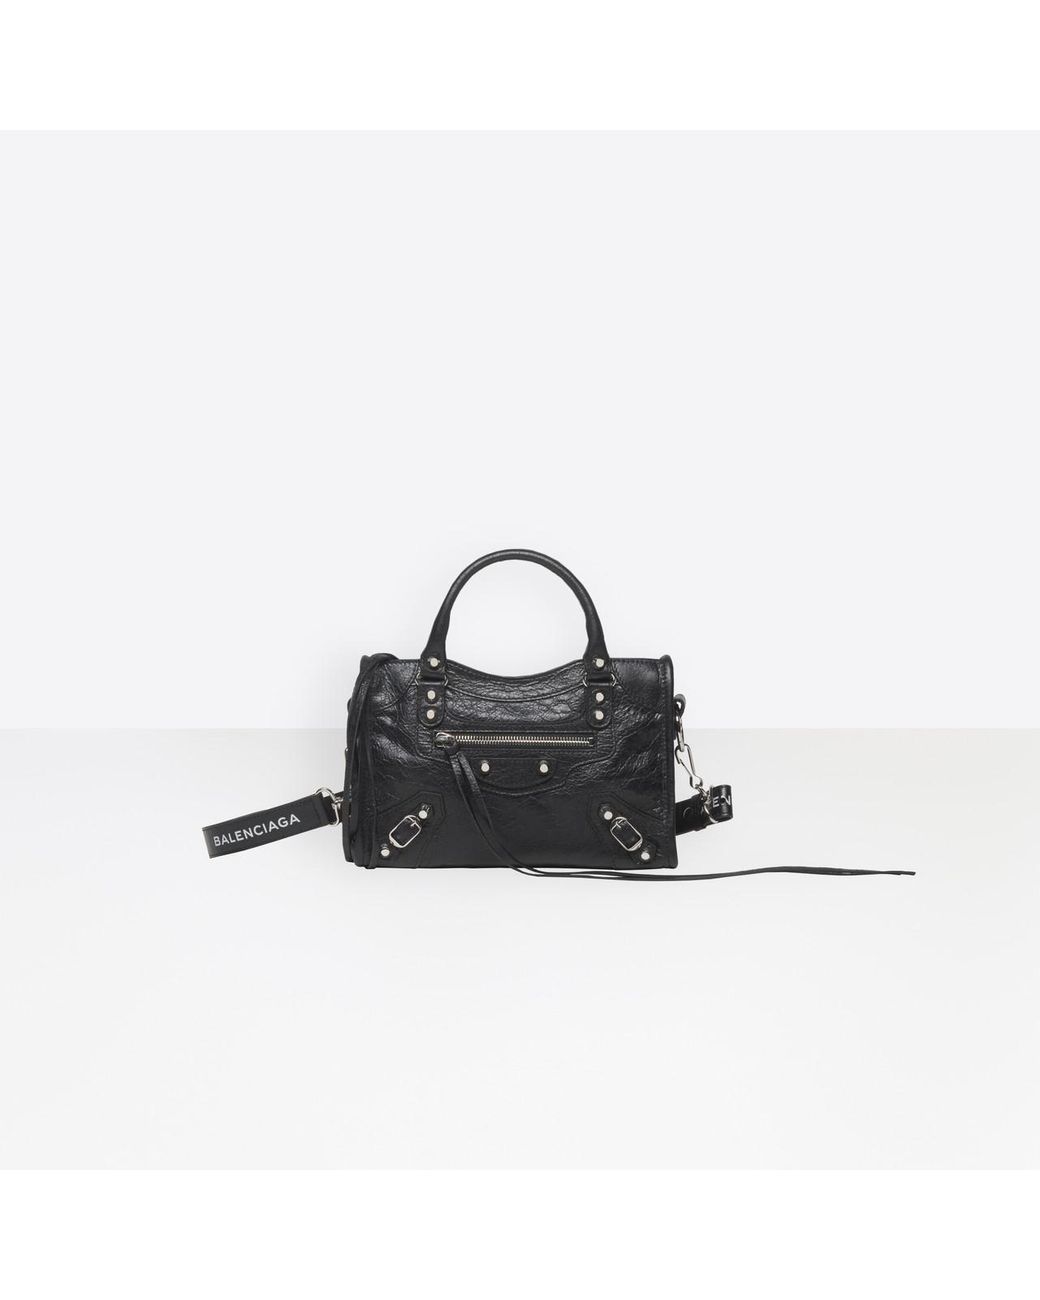 Balenciaga Classic City Black Leather Perforated Mini Satchel Bag 5010   Queen Bee of Beverly Hills